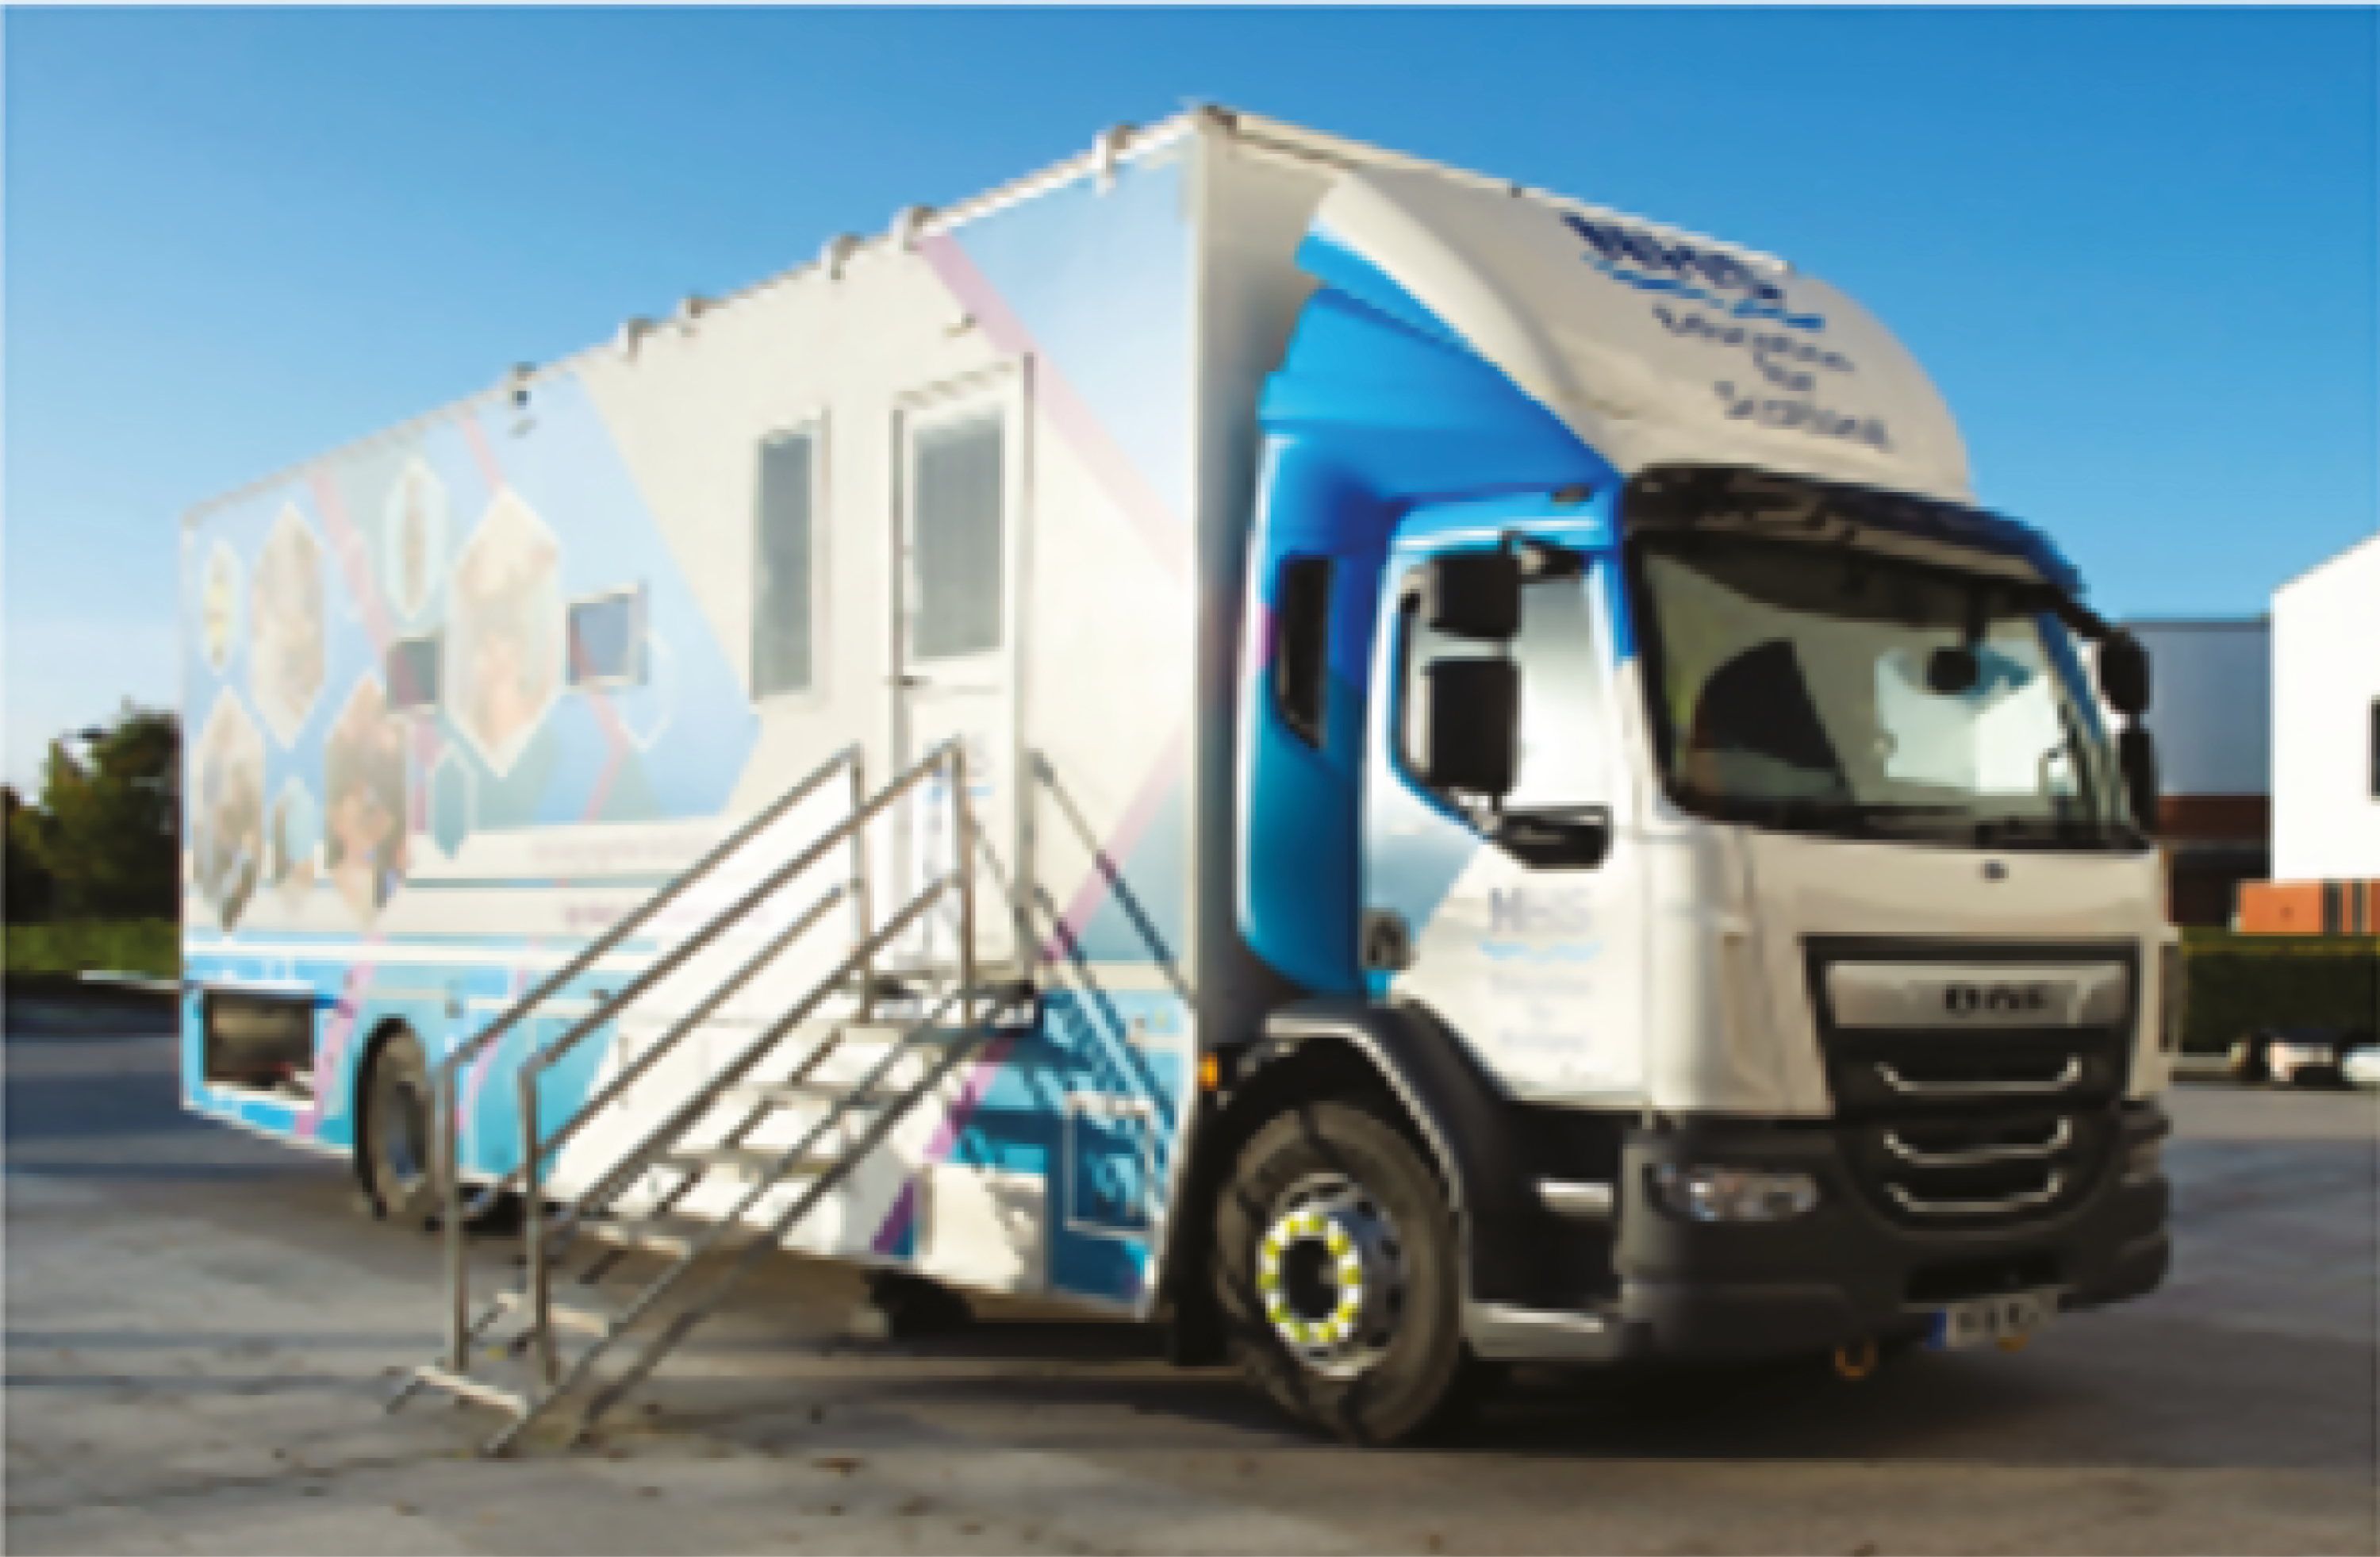 The Mobile Skills Unit (photo courtesy of NHS Education for Scotland)